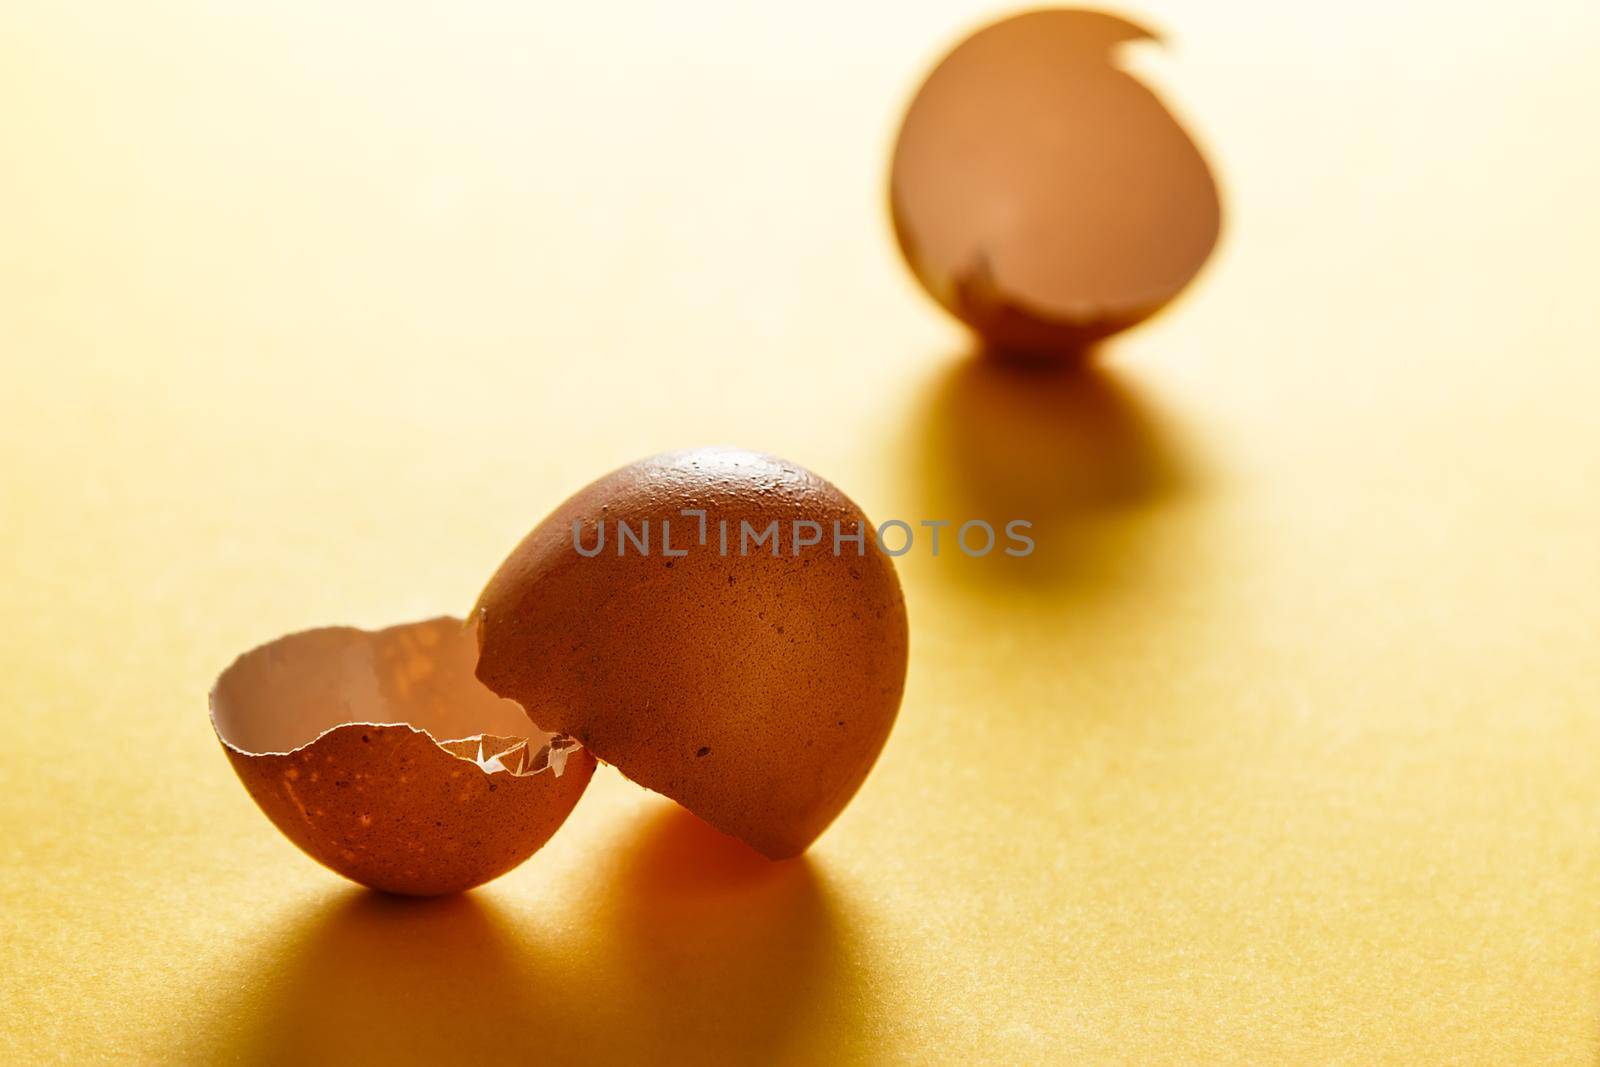 Egg shells on yellow surface with more shells in the background. View in the foreground. Food for a healthy life. Horizontal image.